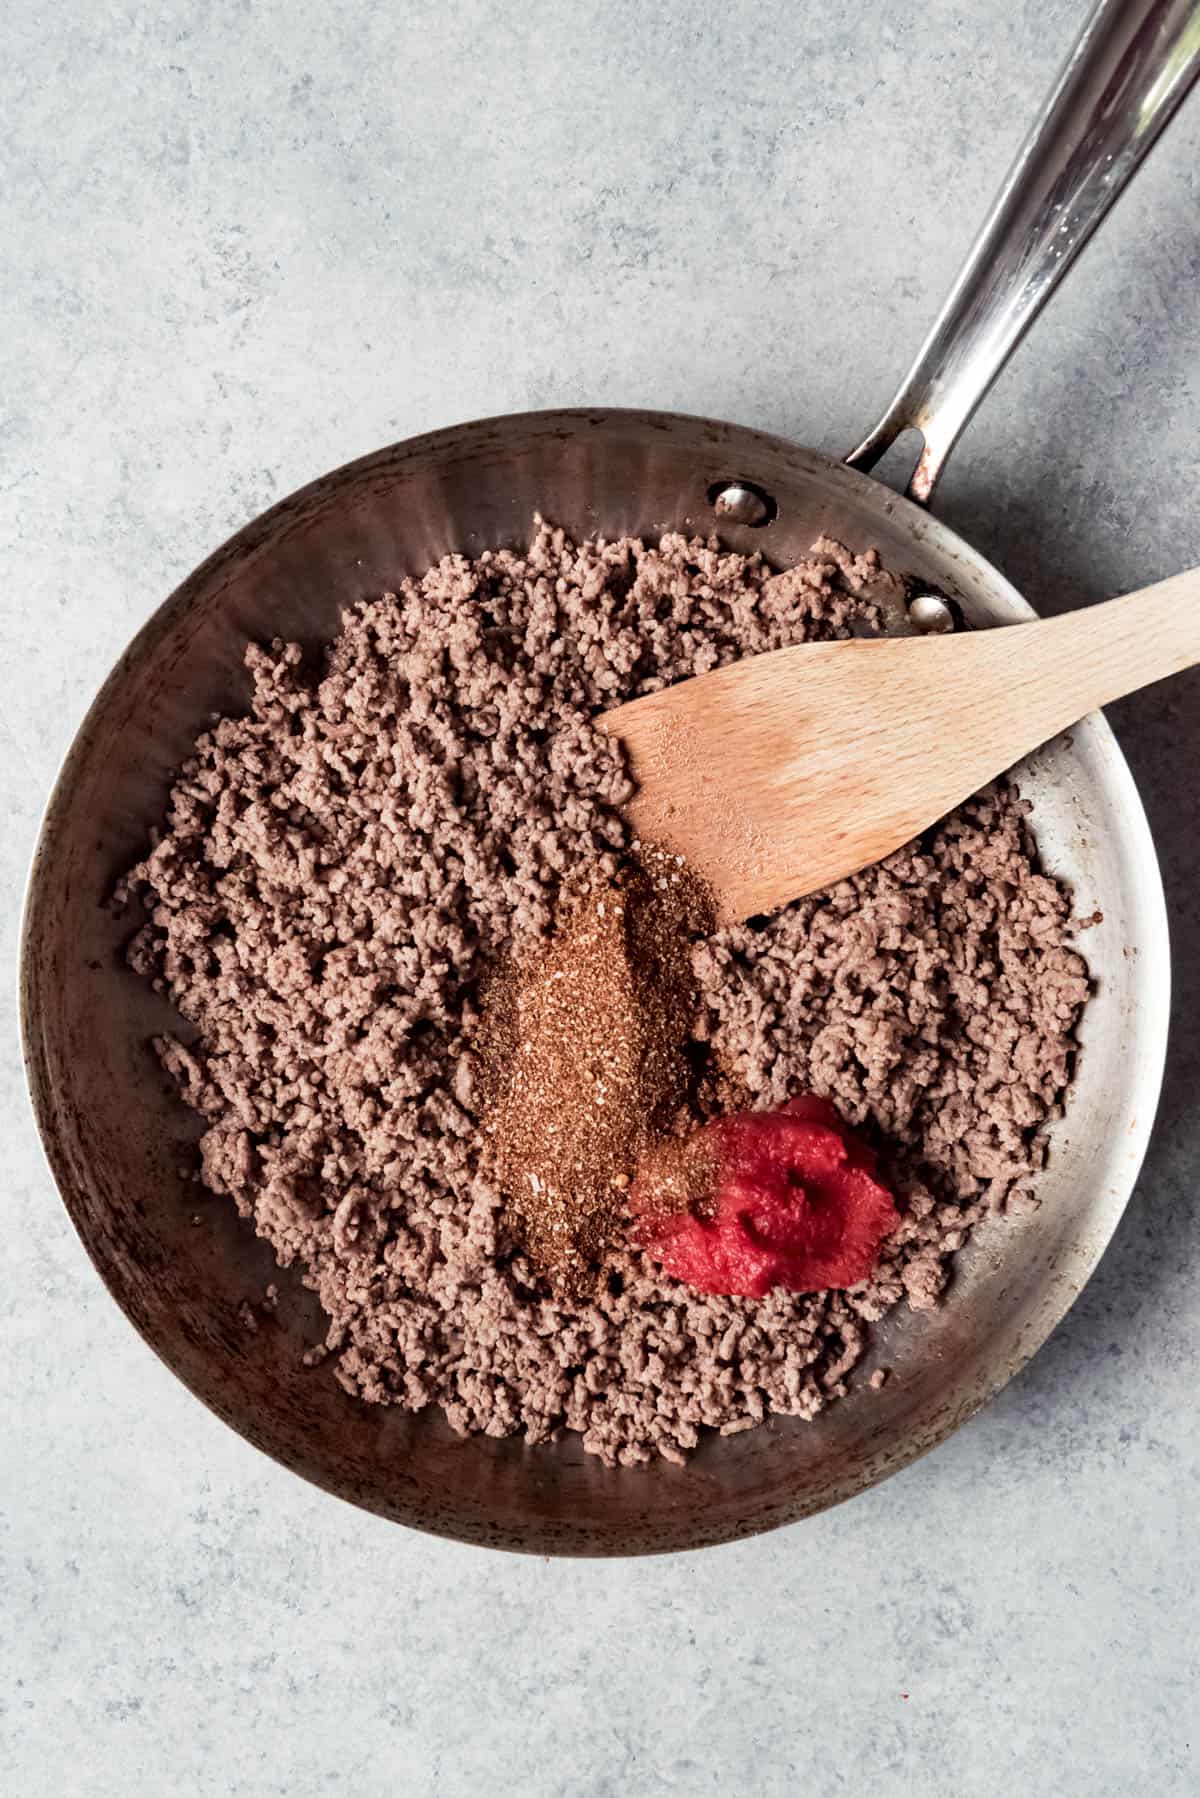 An image of browned ground beef with homemade taco spice blend and tomato paste.